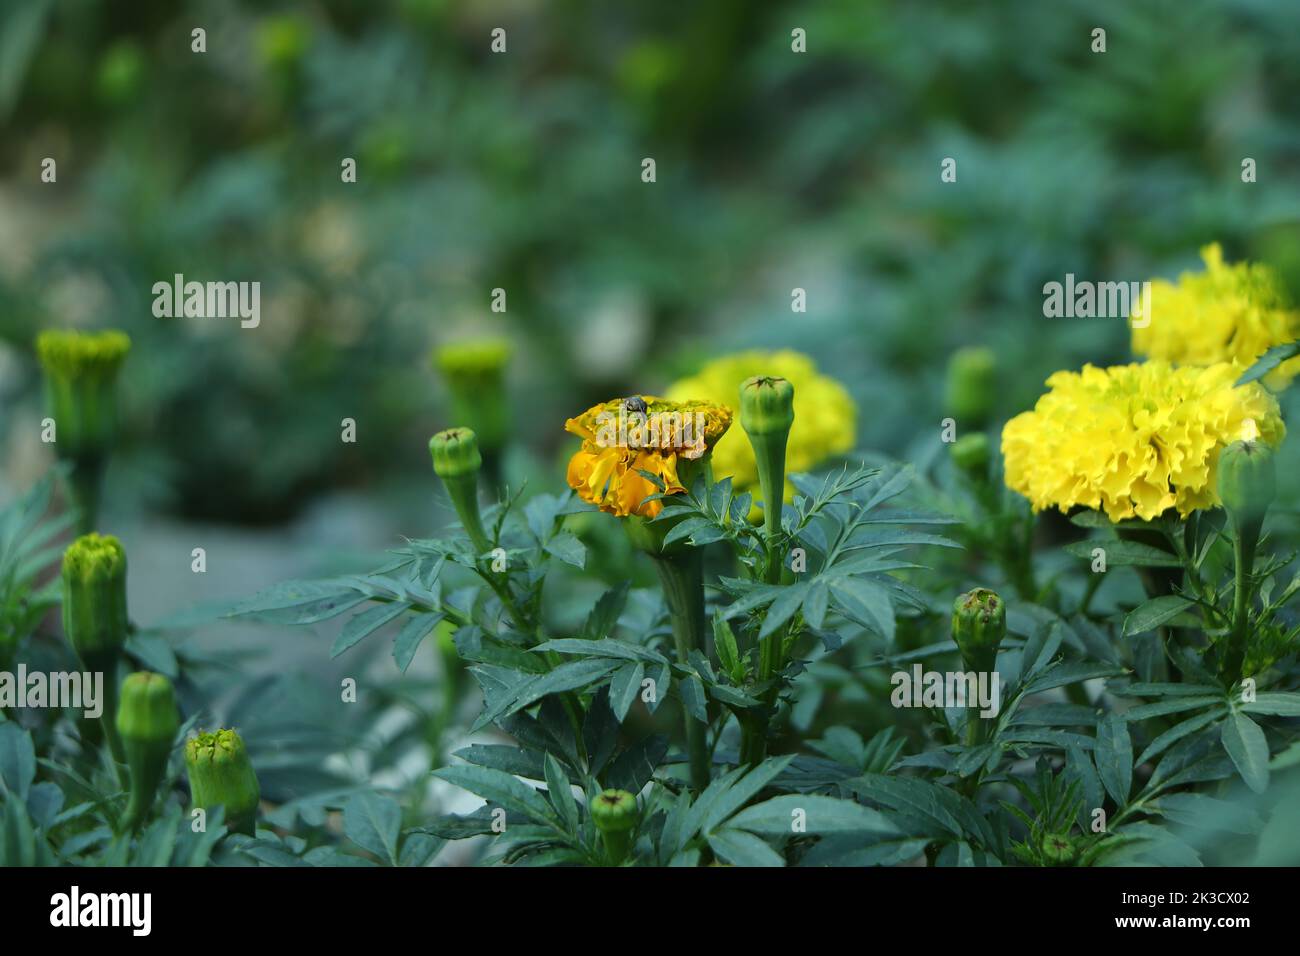 Yellow Marigolds flower (Tagetes erecta, Mexican marigold, Aztec marigold, African marigold) Stock Photo